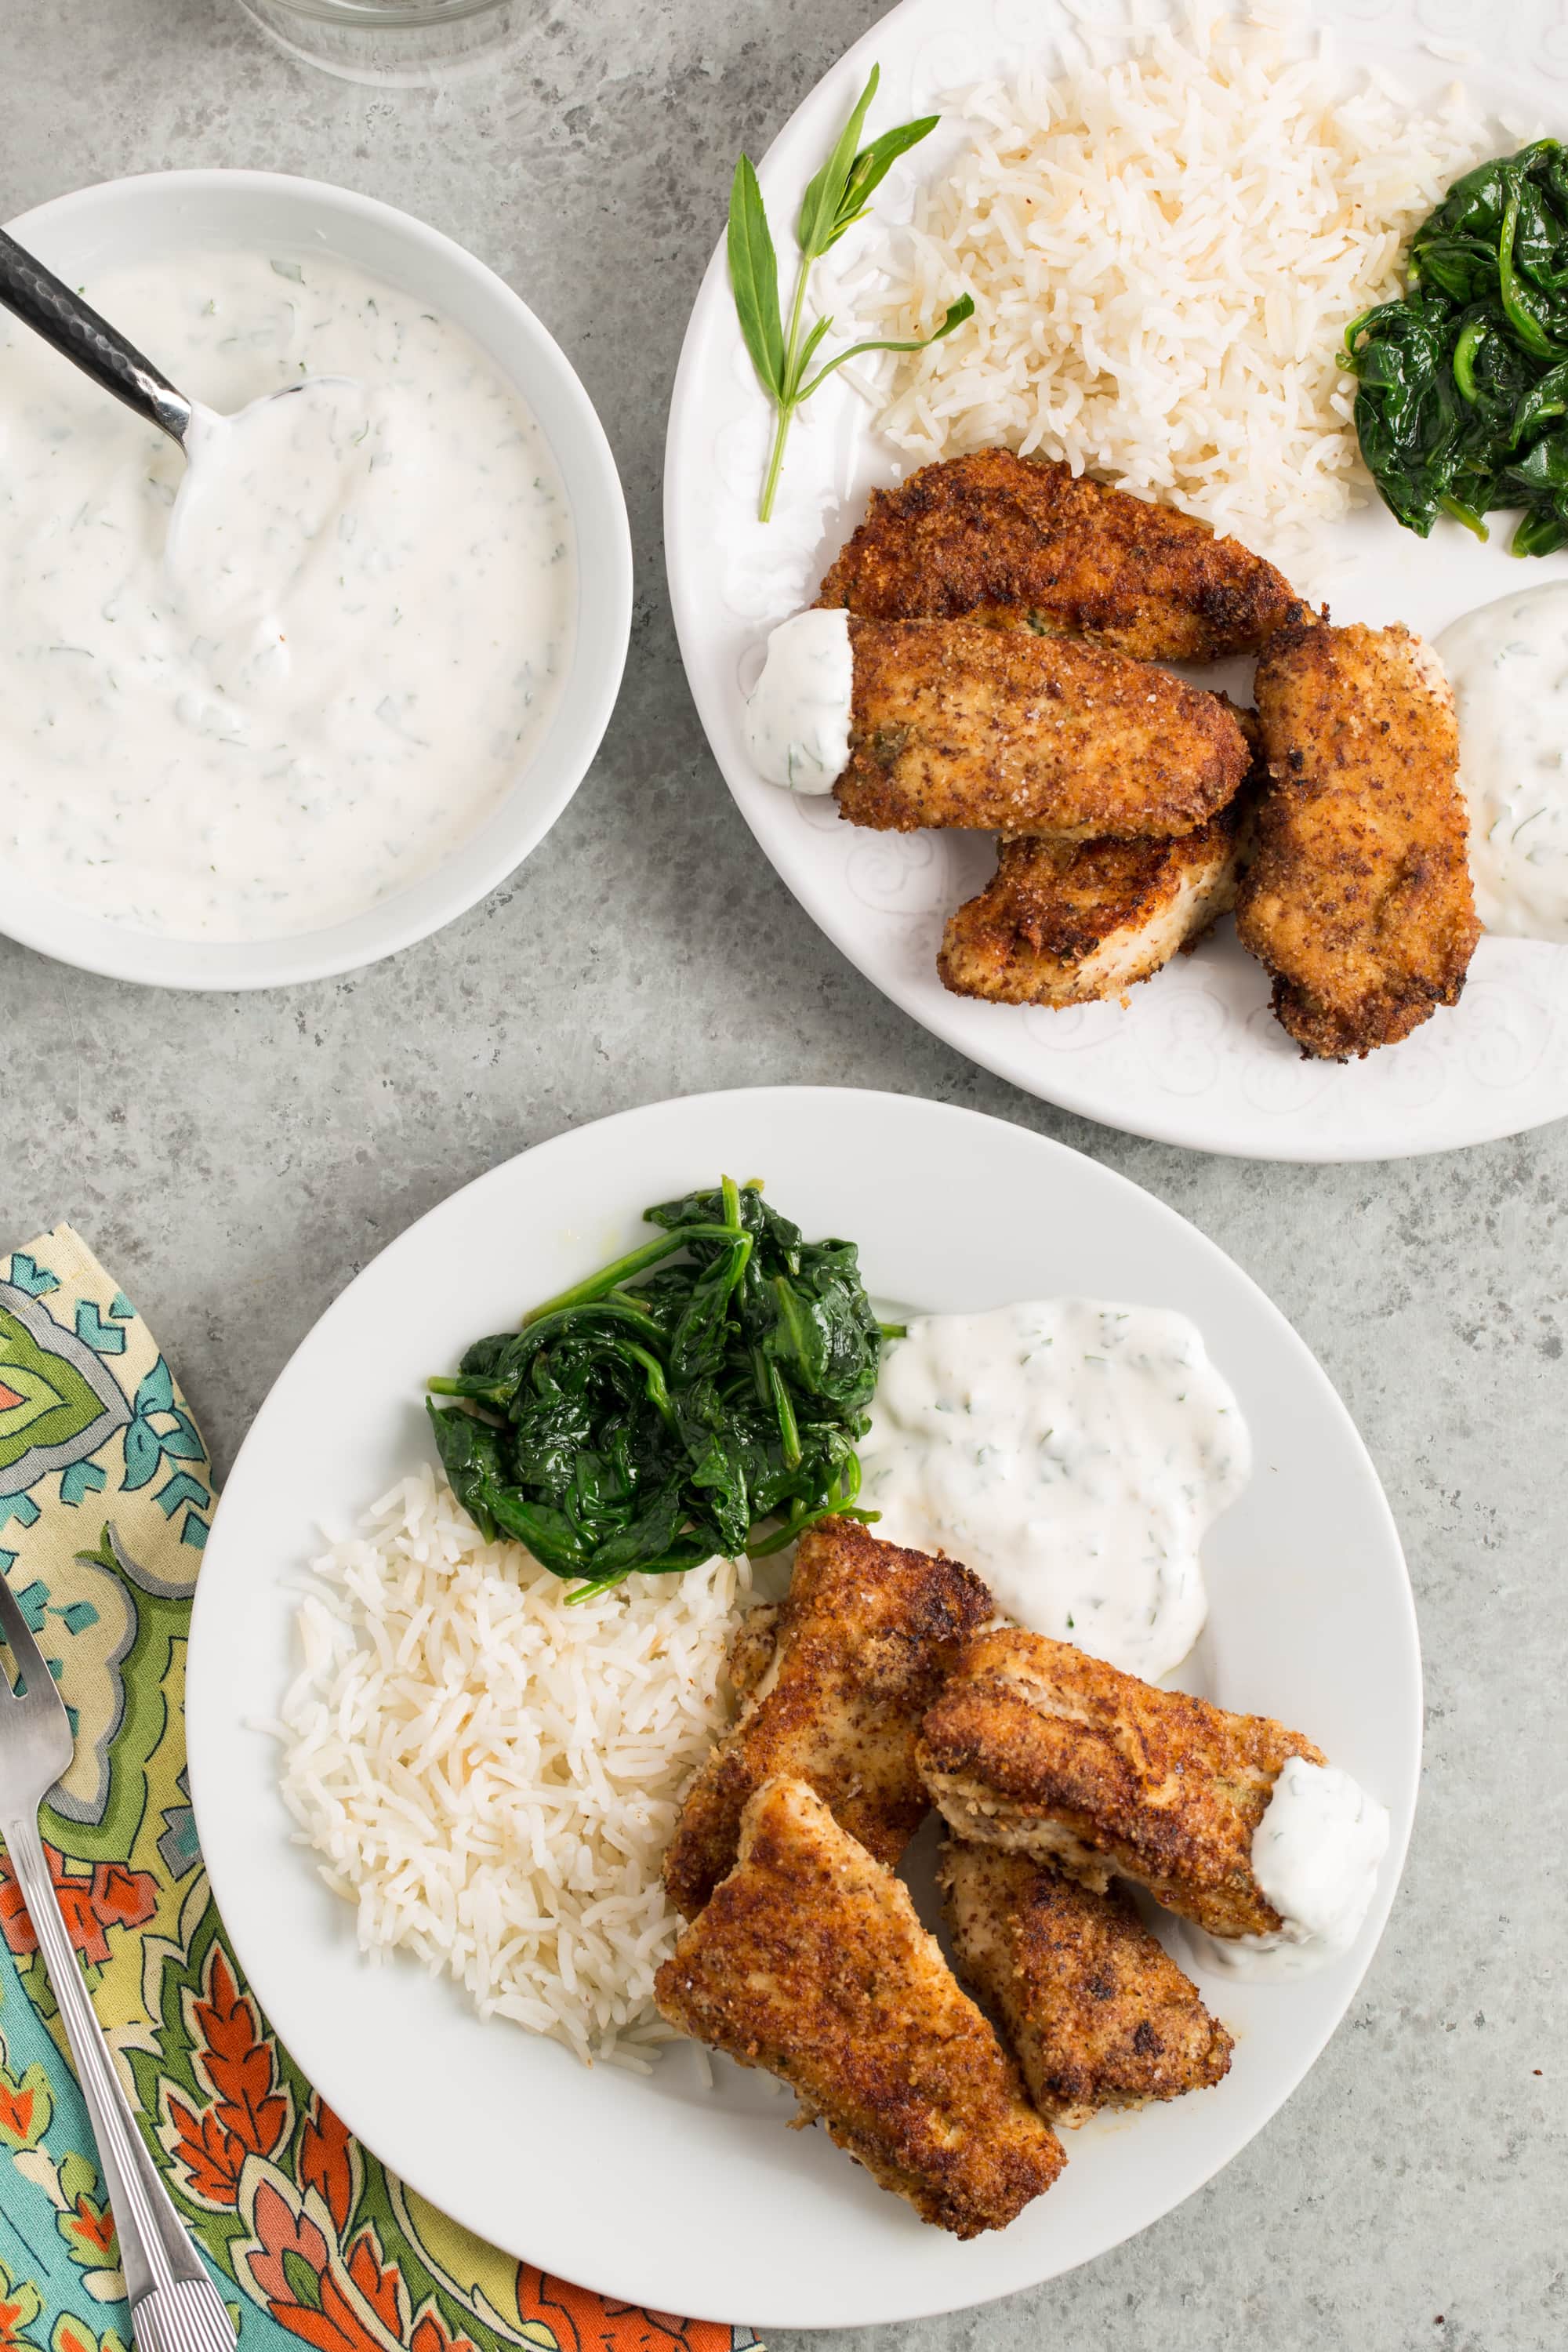 Recipe: Almond-Crusted Chicken Fingers with Yogurt-Herb Dip | Kitchn